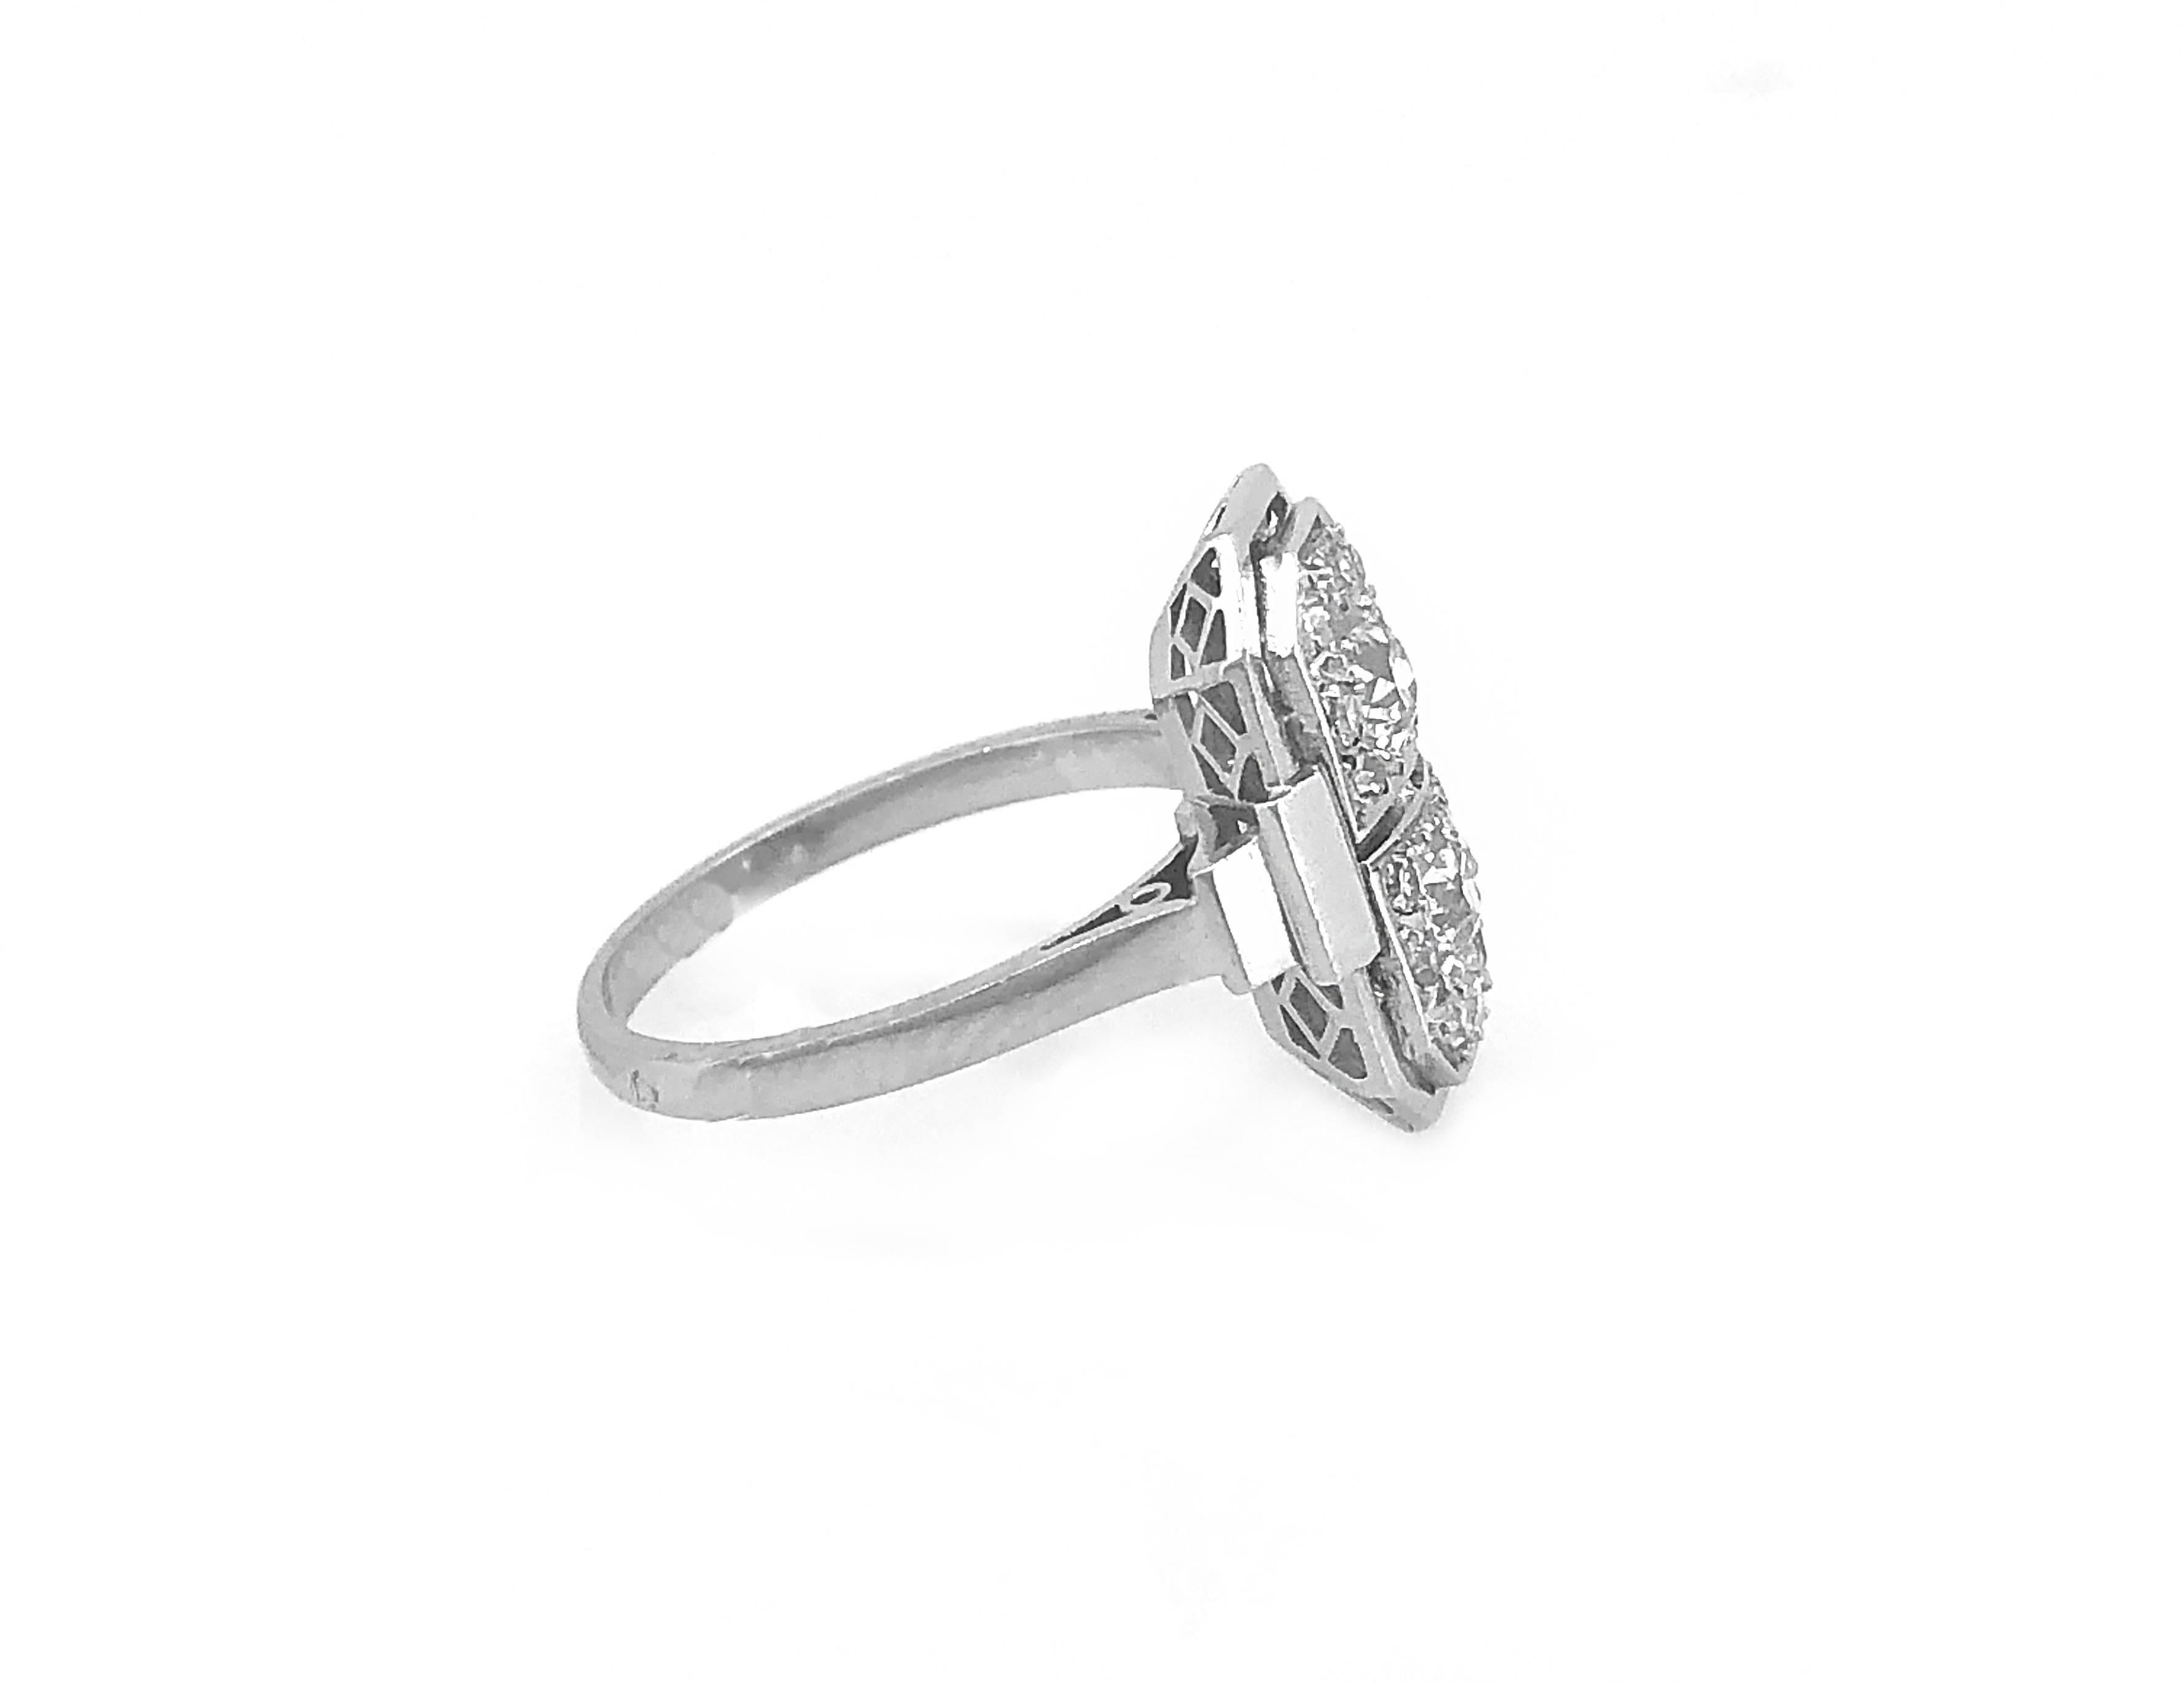 An exquisitely detailed 18k White Gold Art Deco diamond Antique engagement or fashion ring that features .60ct. apx. T.W. of European & Transitional cut diamonds with VS2-SI1 clarity and G-H color which are bright white and sparkling. This ring is